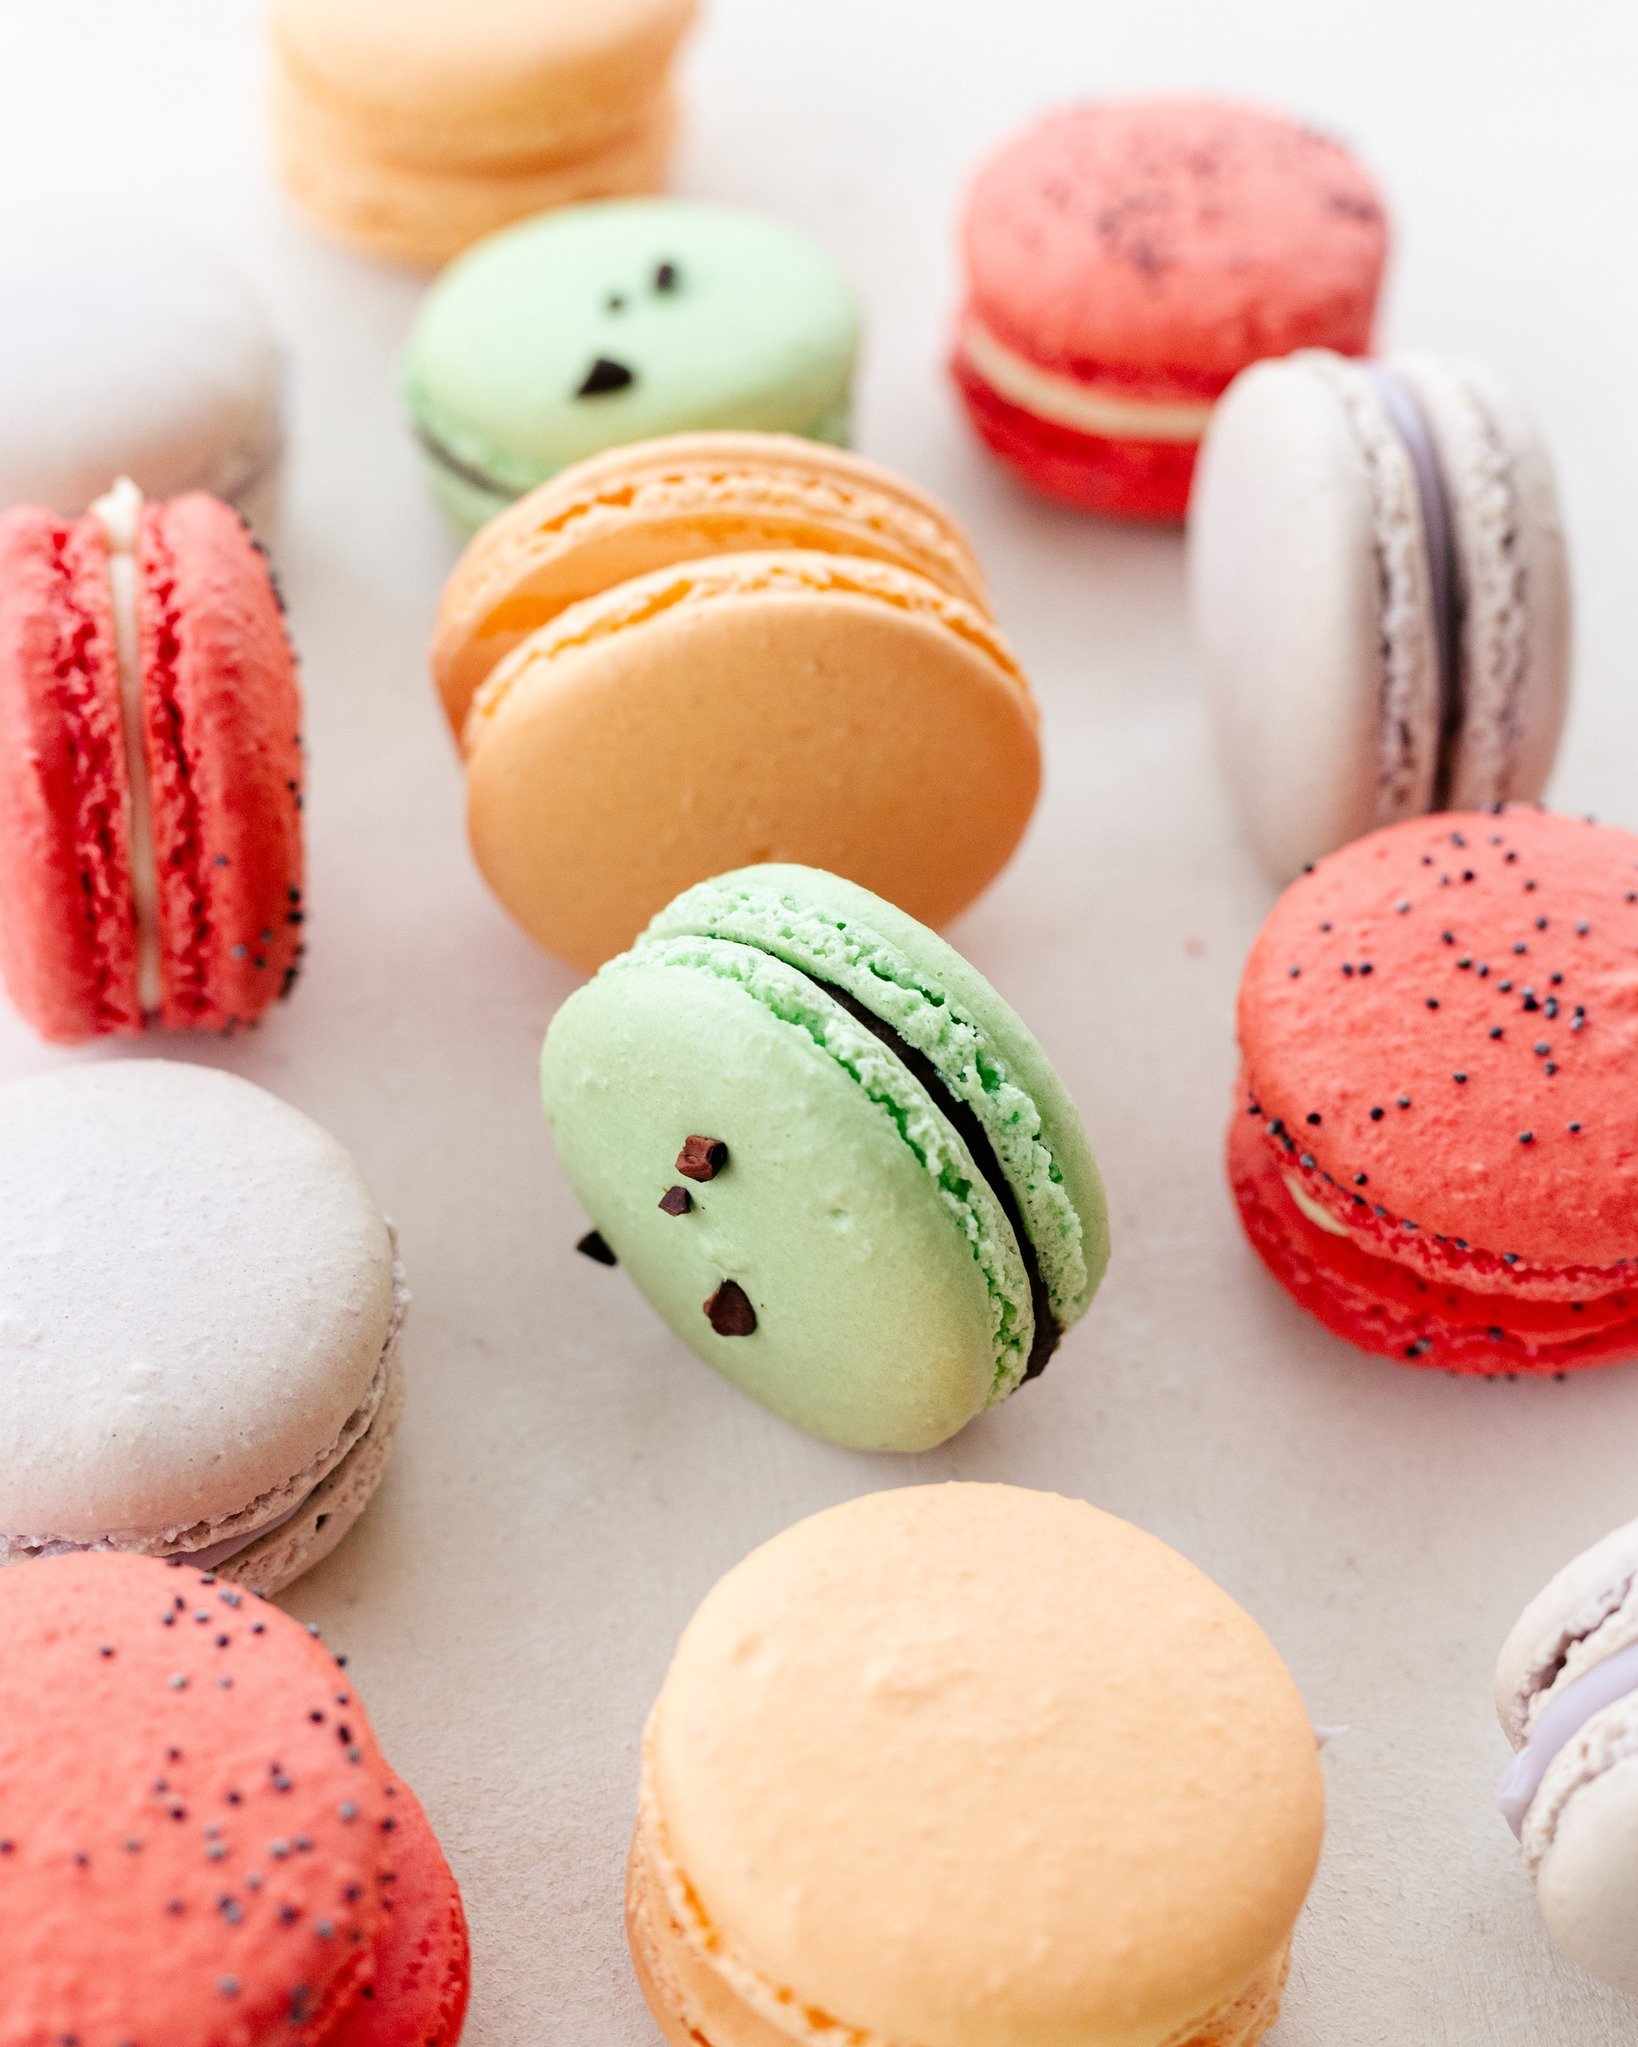 We have a selection of the perfect Patisserie Melanie signature gifts for you to surprise Mom with this Mother&rsquo;s day:

A box of our signature macarons
A box of @necessity.coffee espresso
A selection of sabl&eacute; shortbreads
A Patisserie Mela